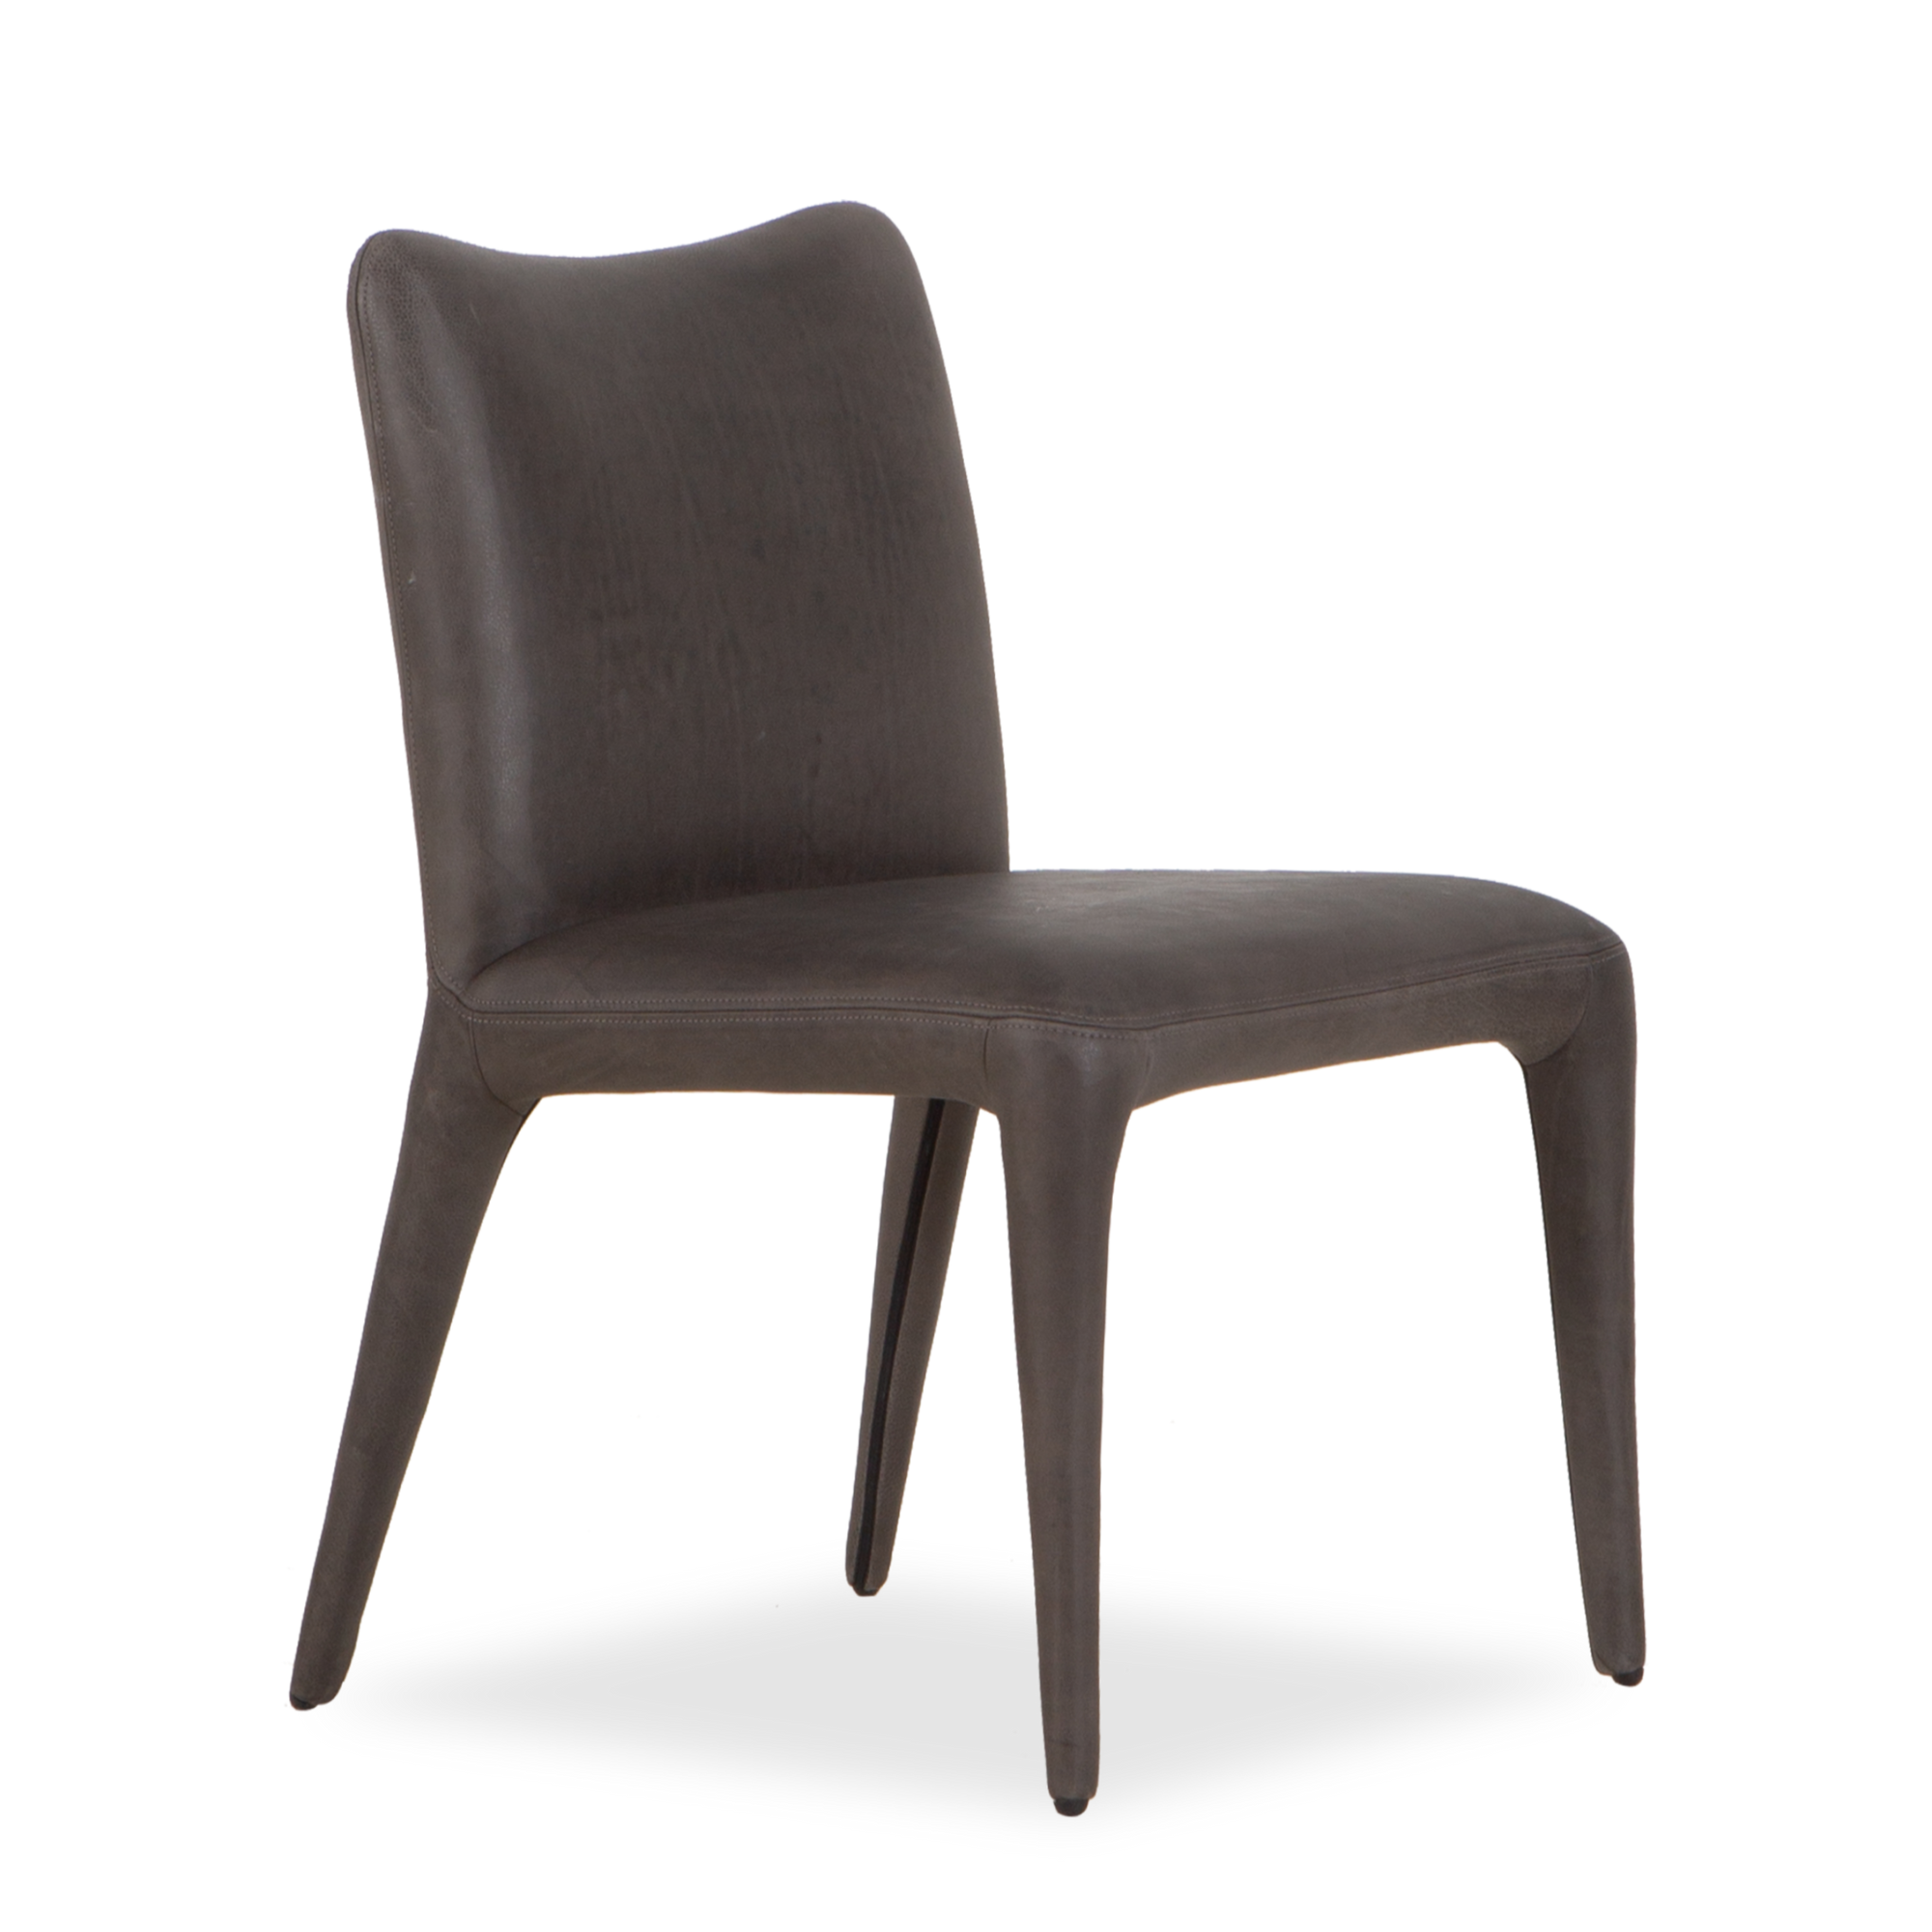 The archetypal modern dining chair, Fibi has a universal elegance that complements any style of table.